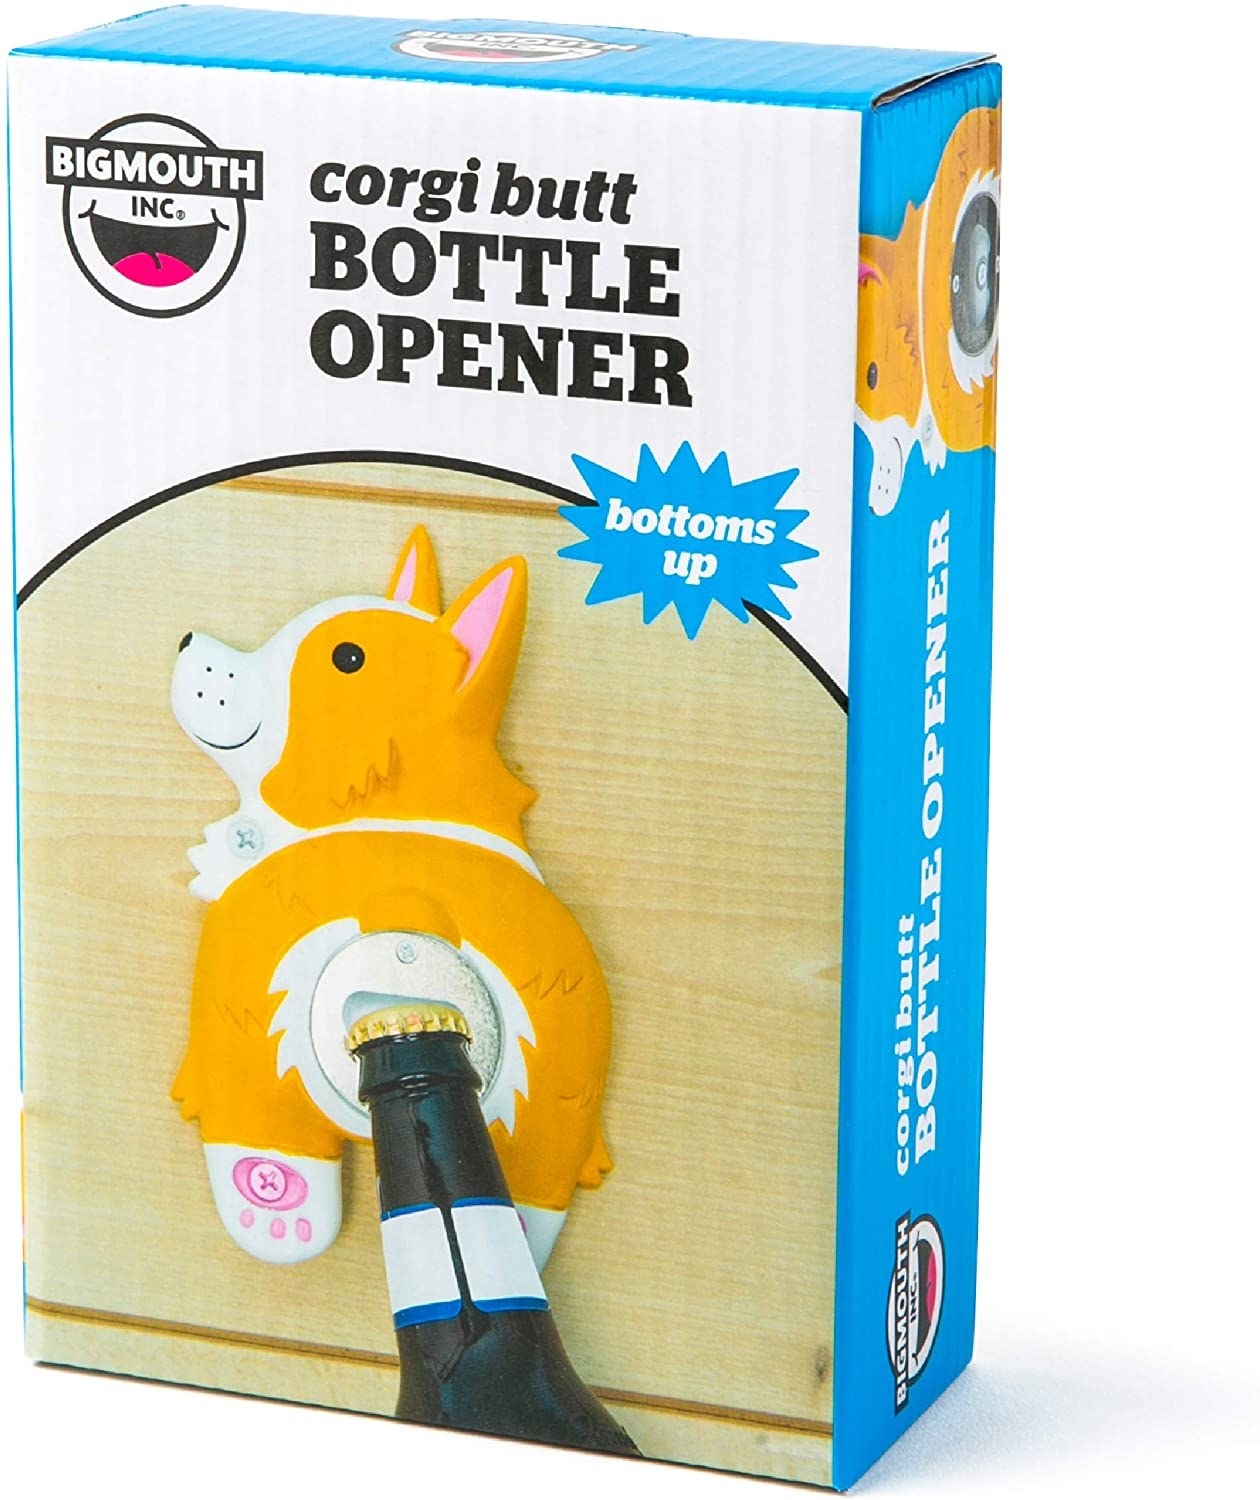 A box with a corgi on it and its butt opens beer bottles